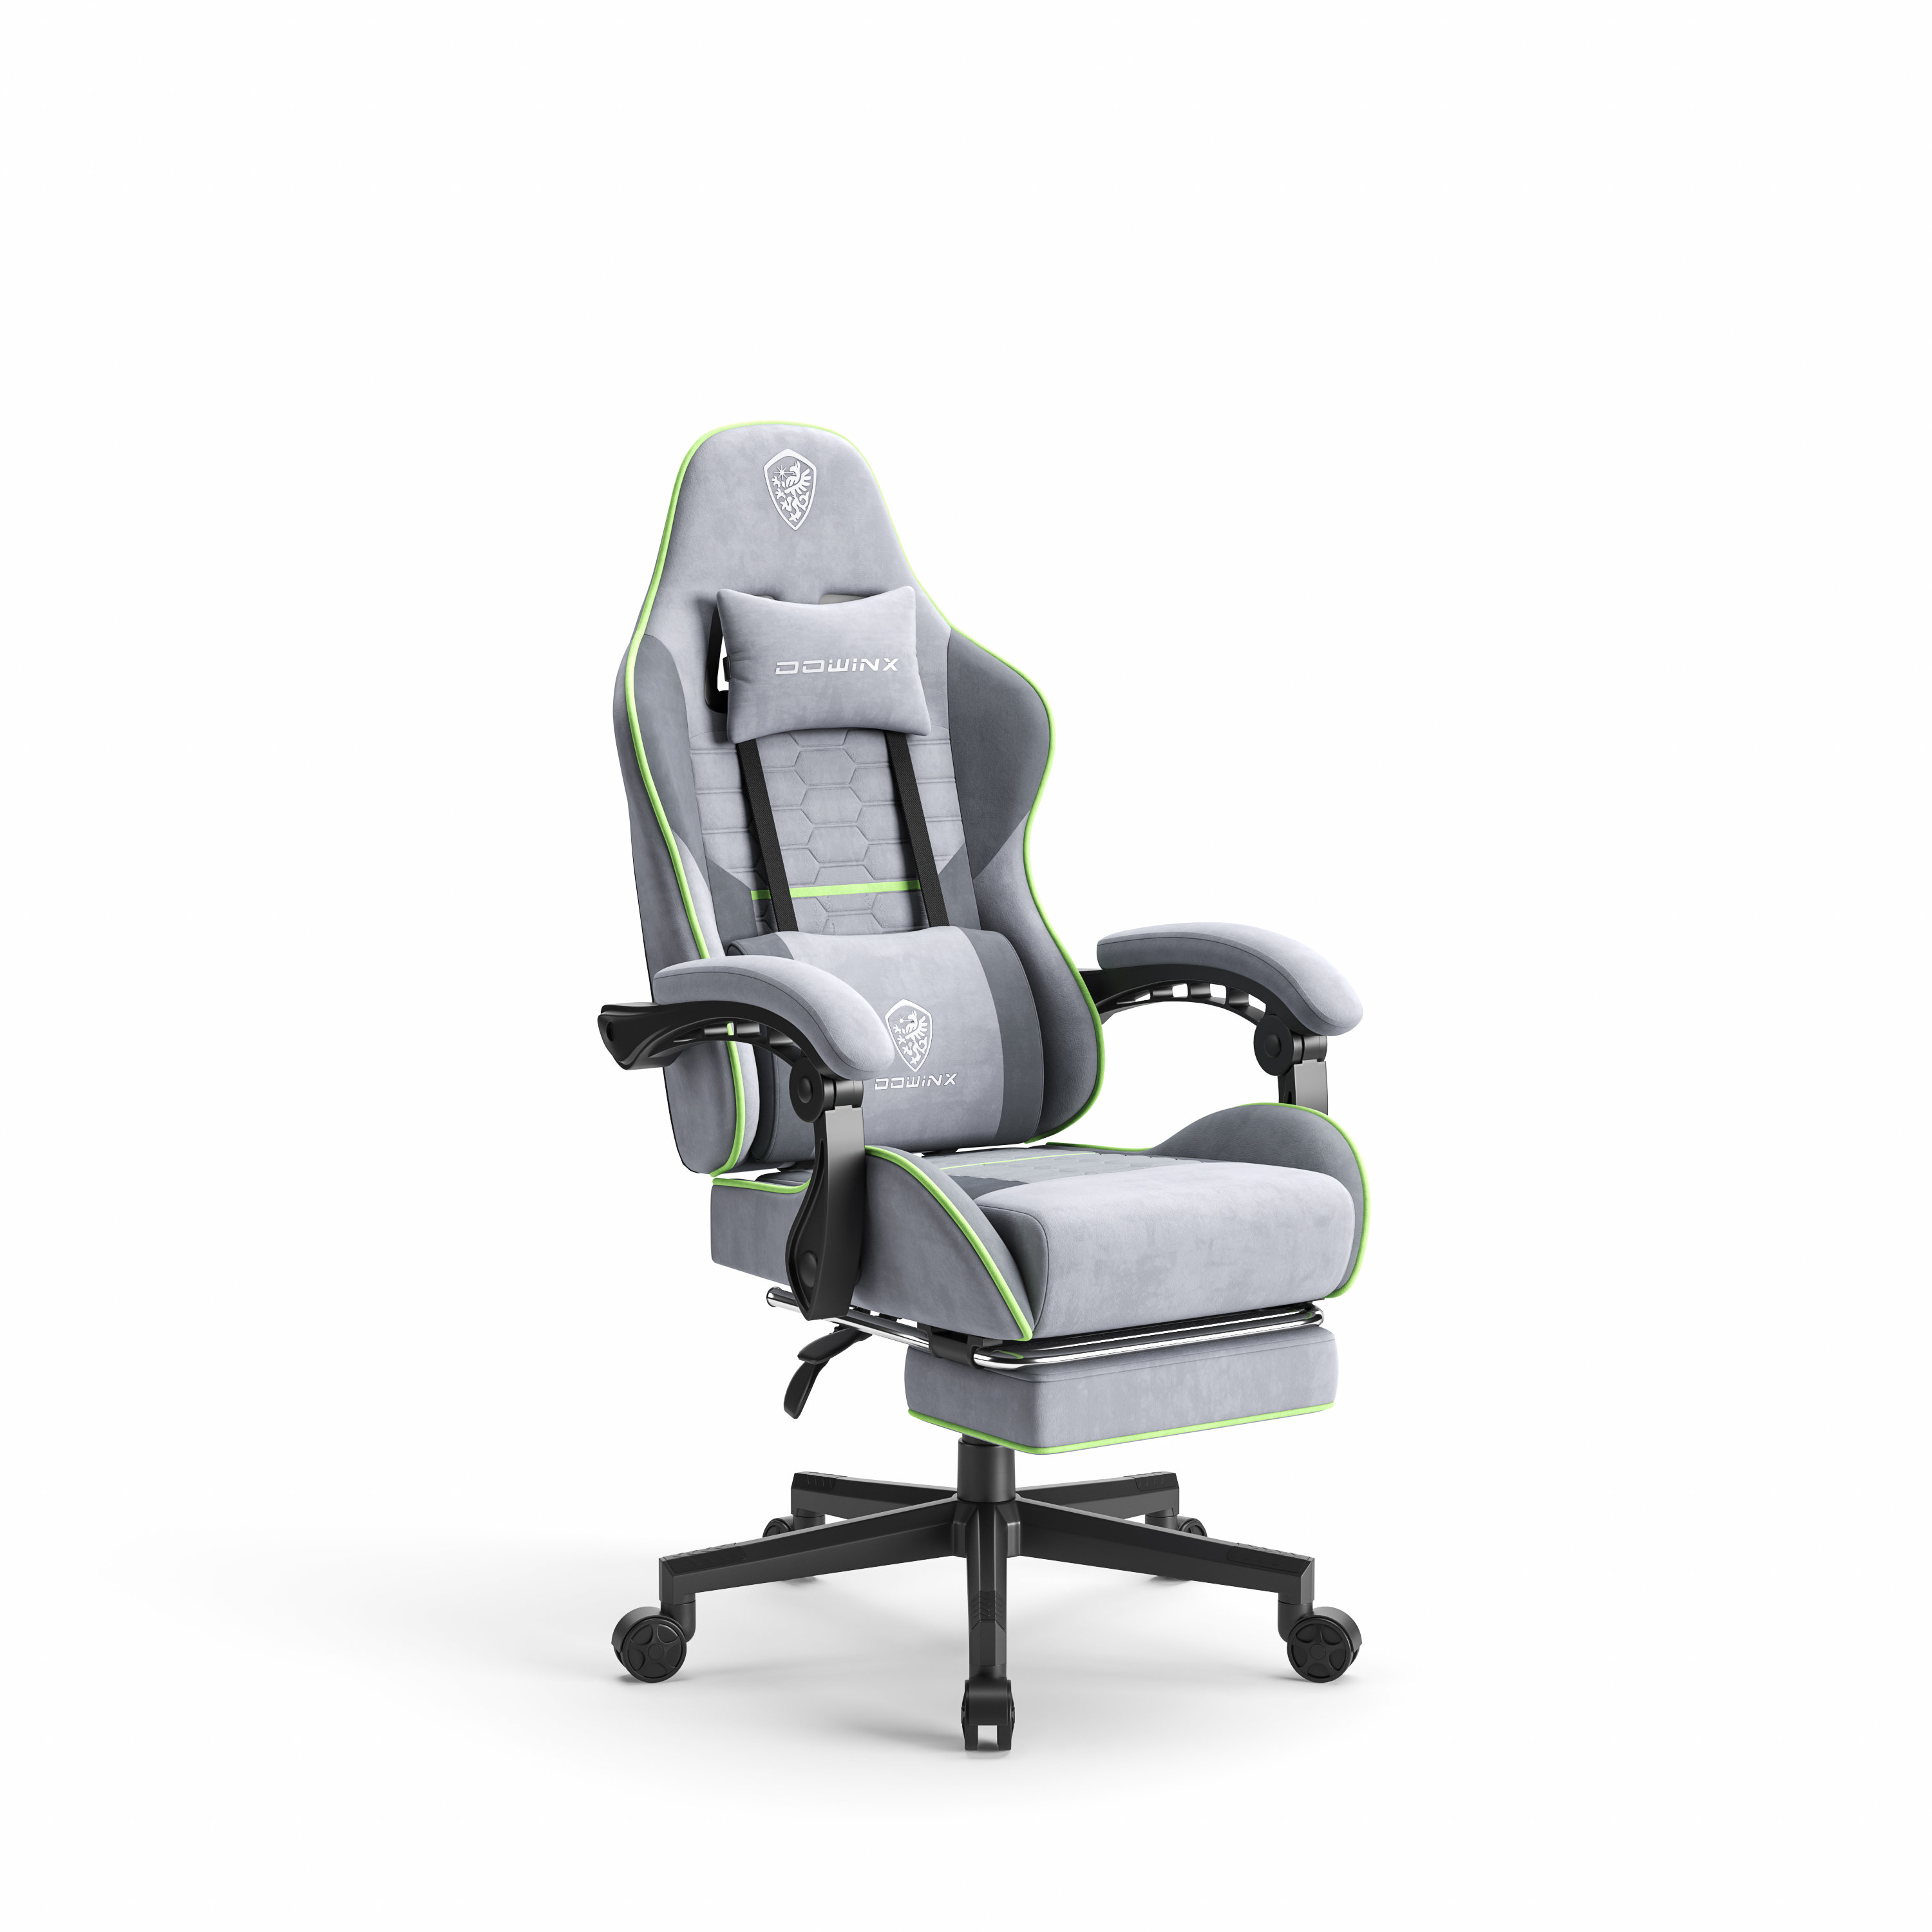 Dowinx Adjustable Reclining Ergonomic Leather Swiveling Game Chair